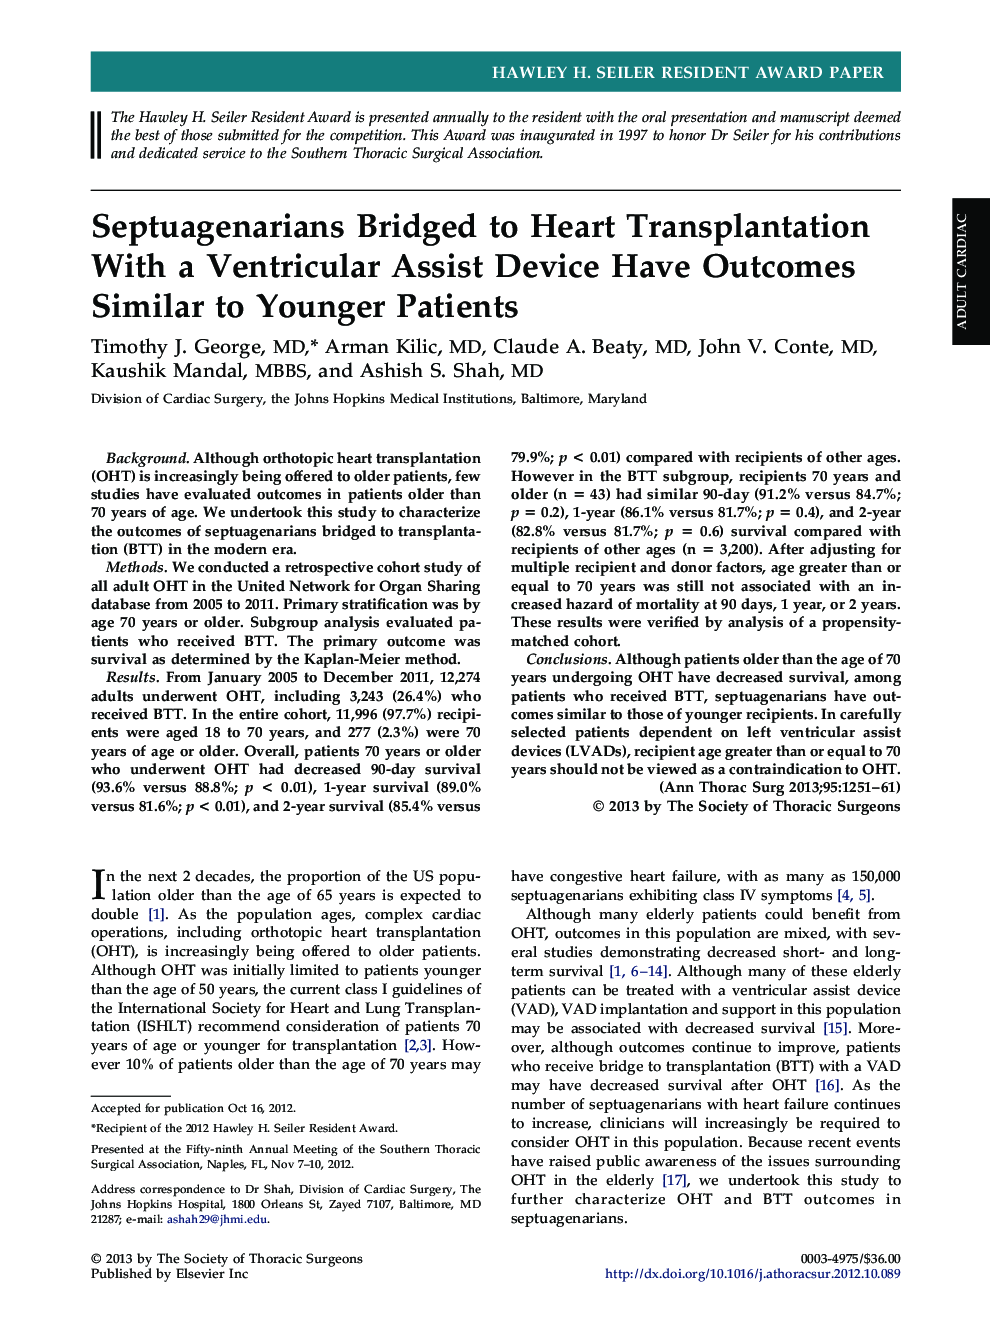 Septuagenarians Bridged to Heart Transplantation With a Ventricular Assist Device Have Outcomes Similar to Younger Patients